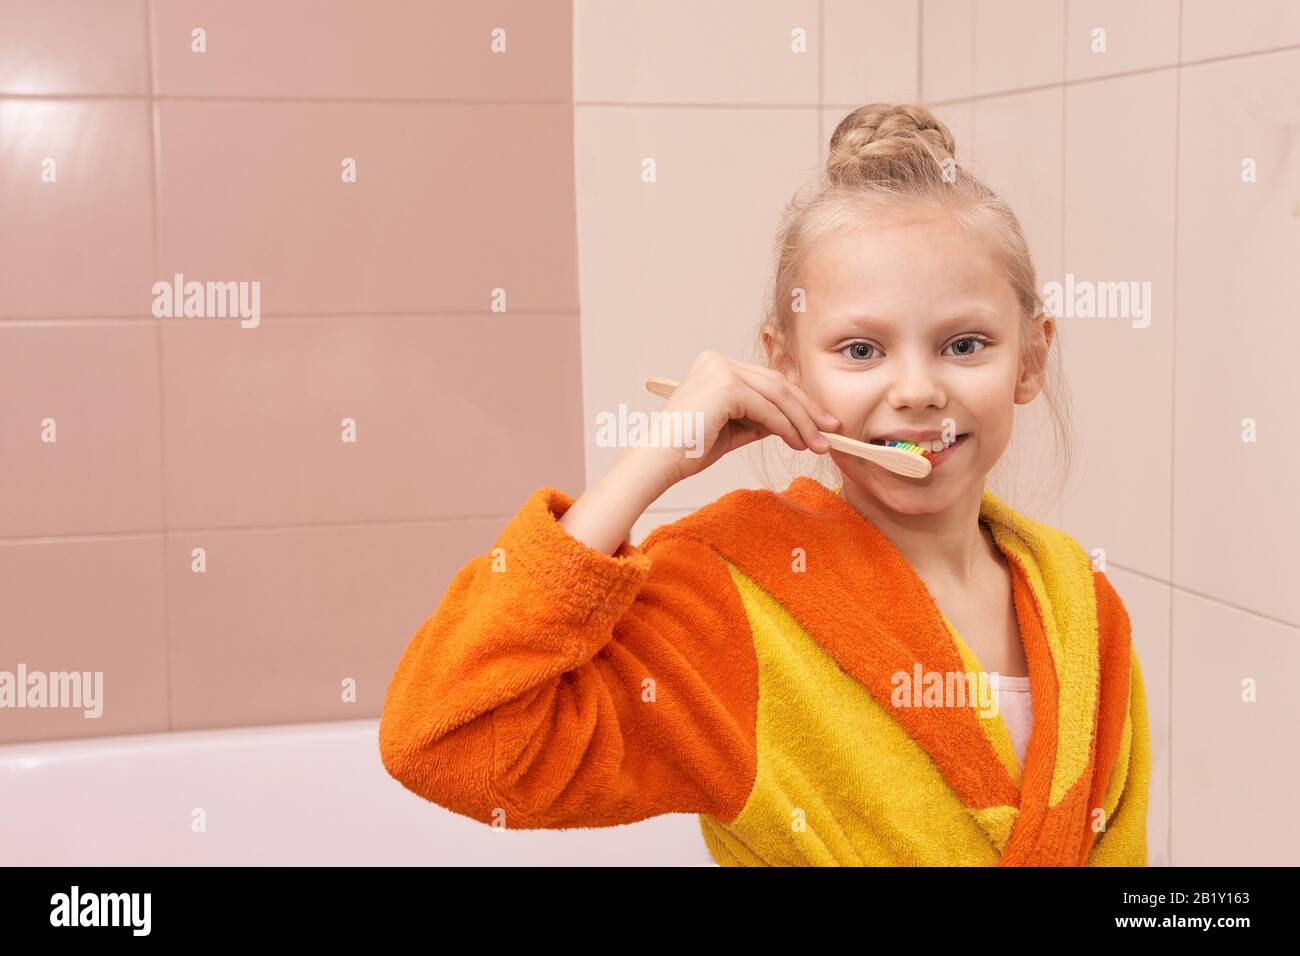 Young girl dental care. Child wash teeth Stock Photo